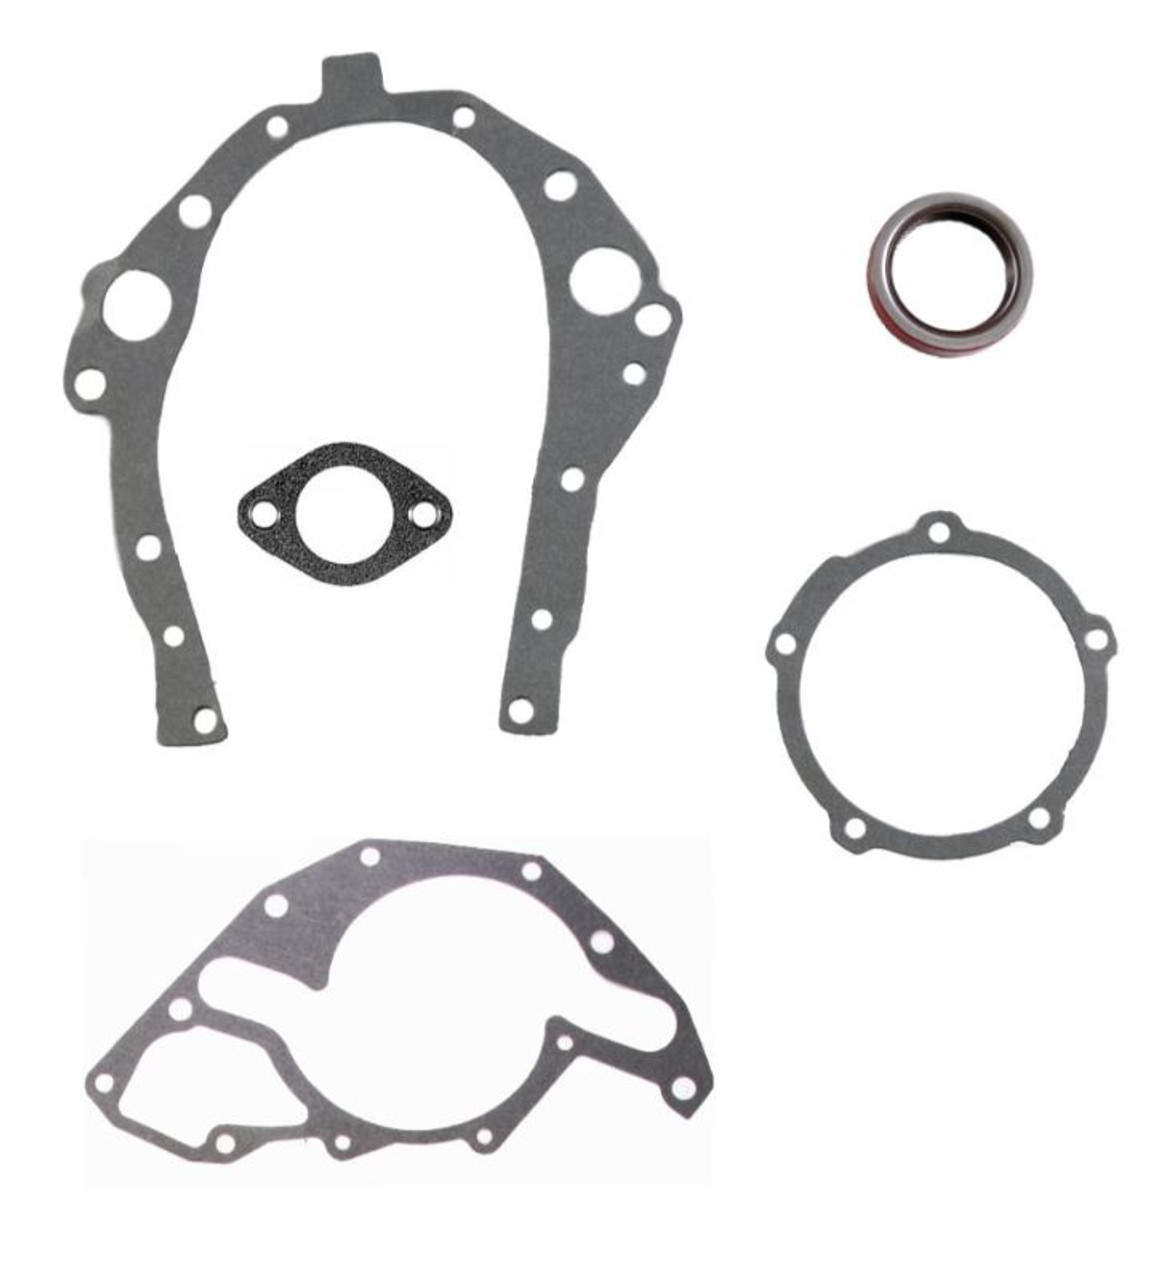 1987 Buick Century 2.8L Engine Timing Cover Gasket Set TCC189-A -1